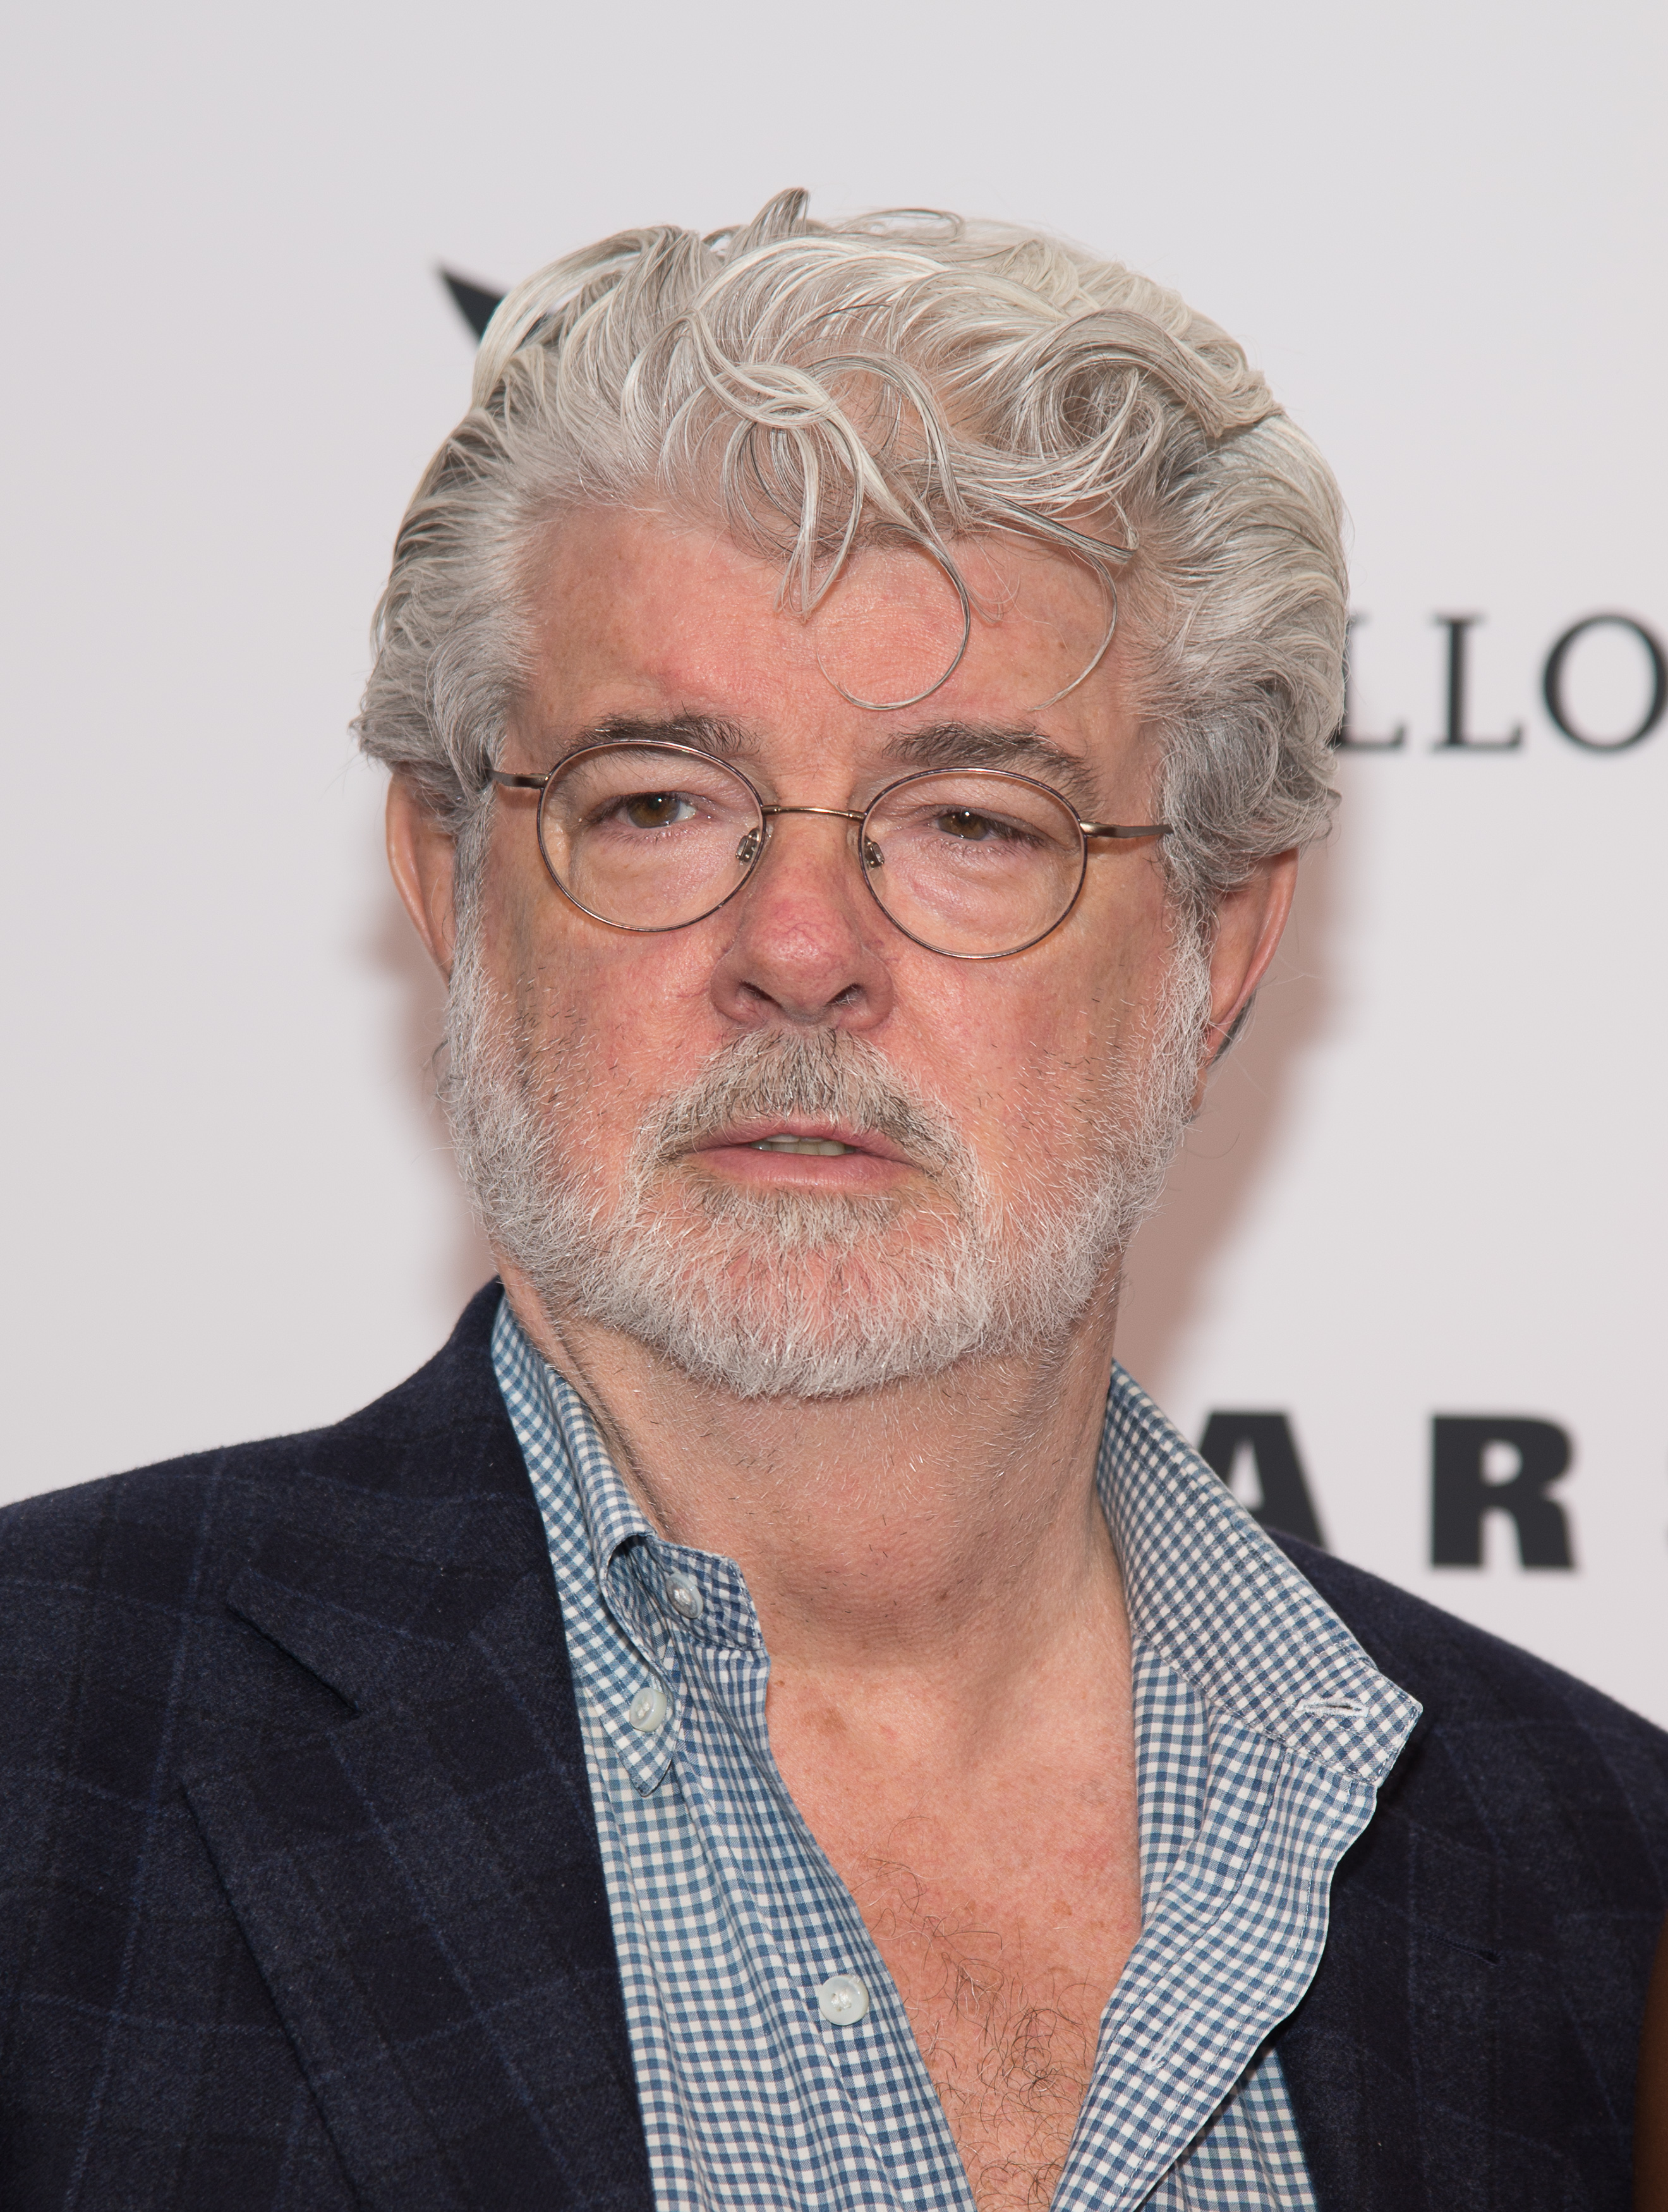 George Lucas attends the Apollo Spring Gala and 80th Anniversary Celebration at The Apollo Theater on June 10, 2014 in New York City. (Dave Kotinsky&amp;mdash;Getty Images)